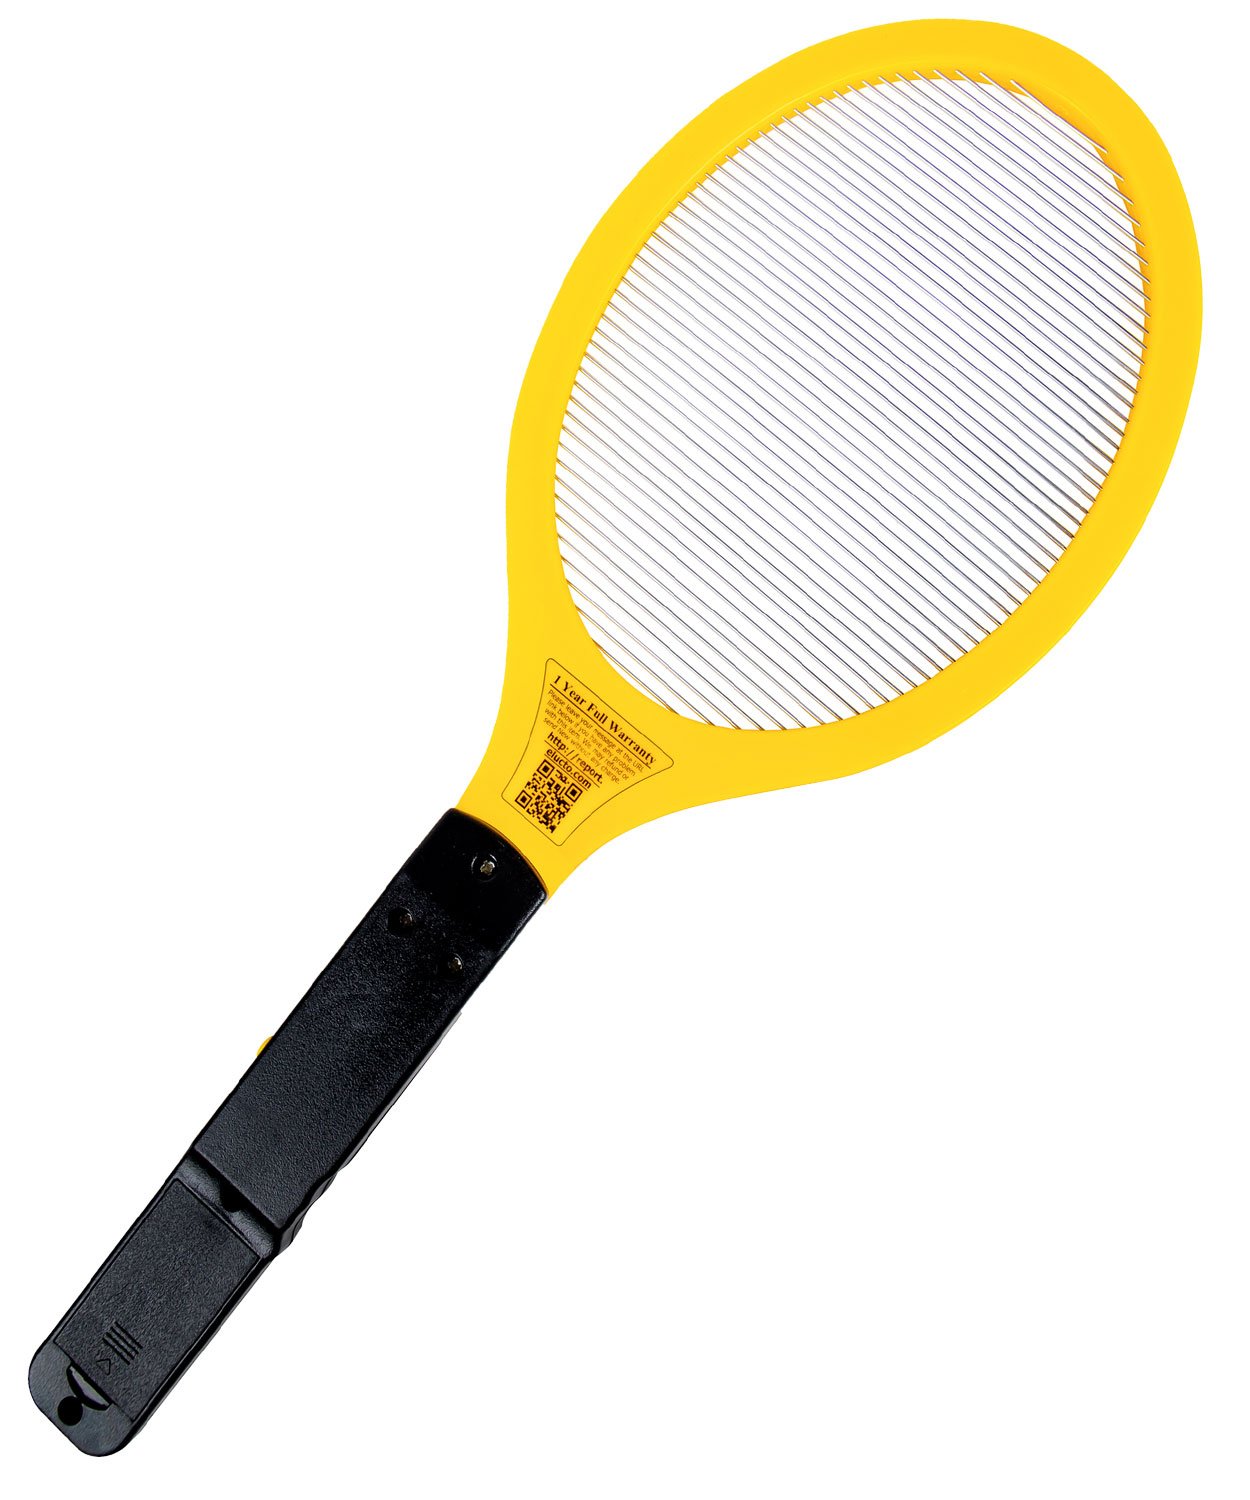 Zap Electric Bug Racket Fly Swatter Mosquito Indoor and Outdoor, Pest Control, Fly Killer - image 1 of 8